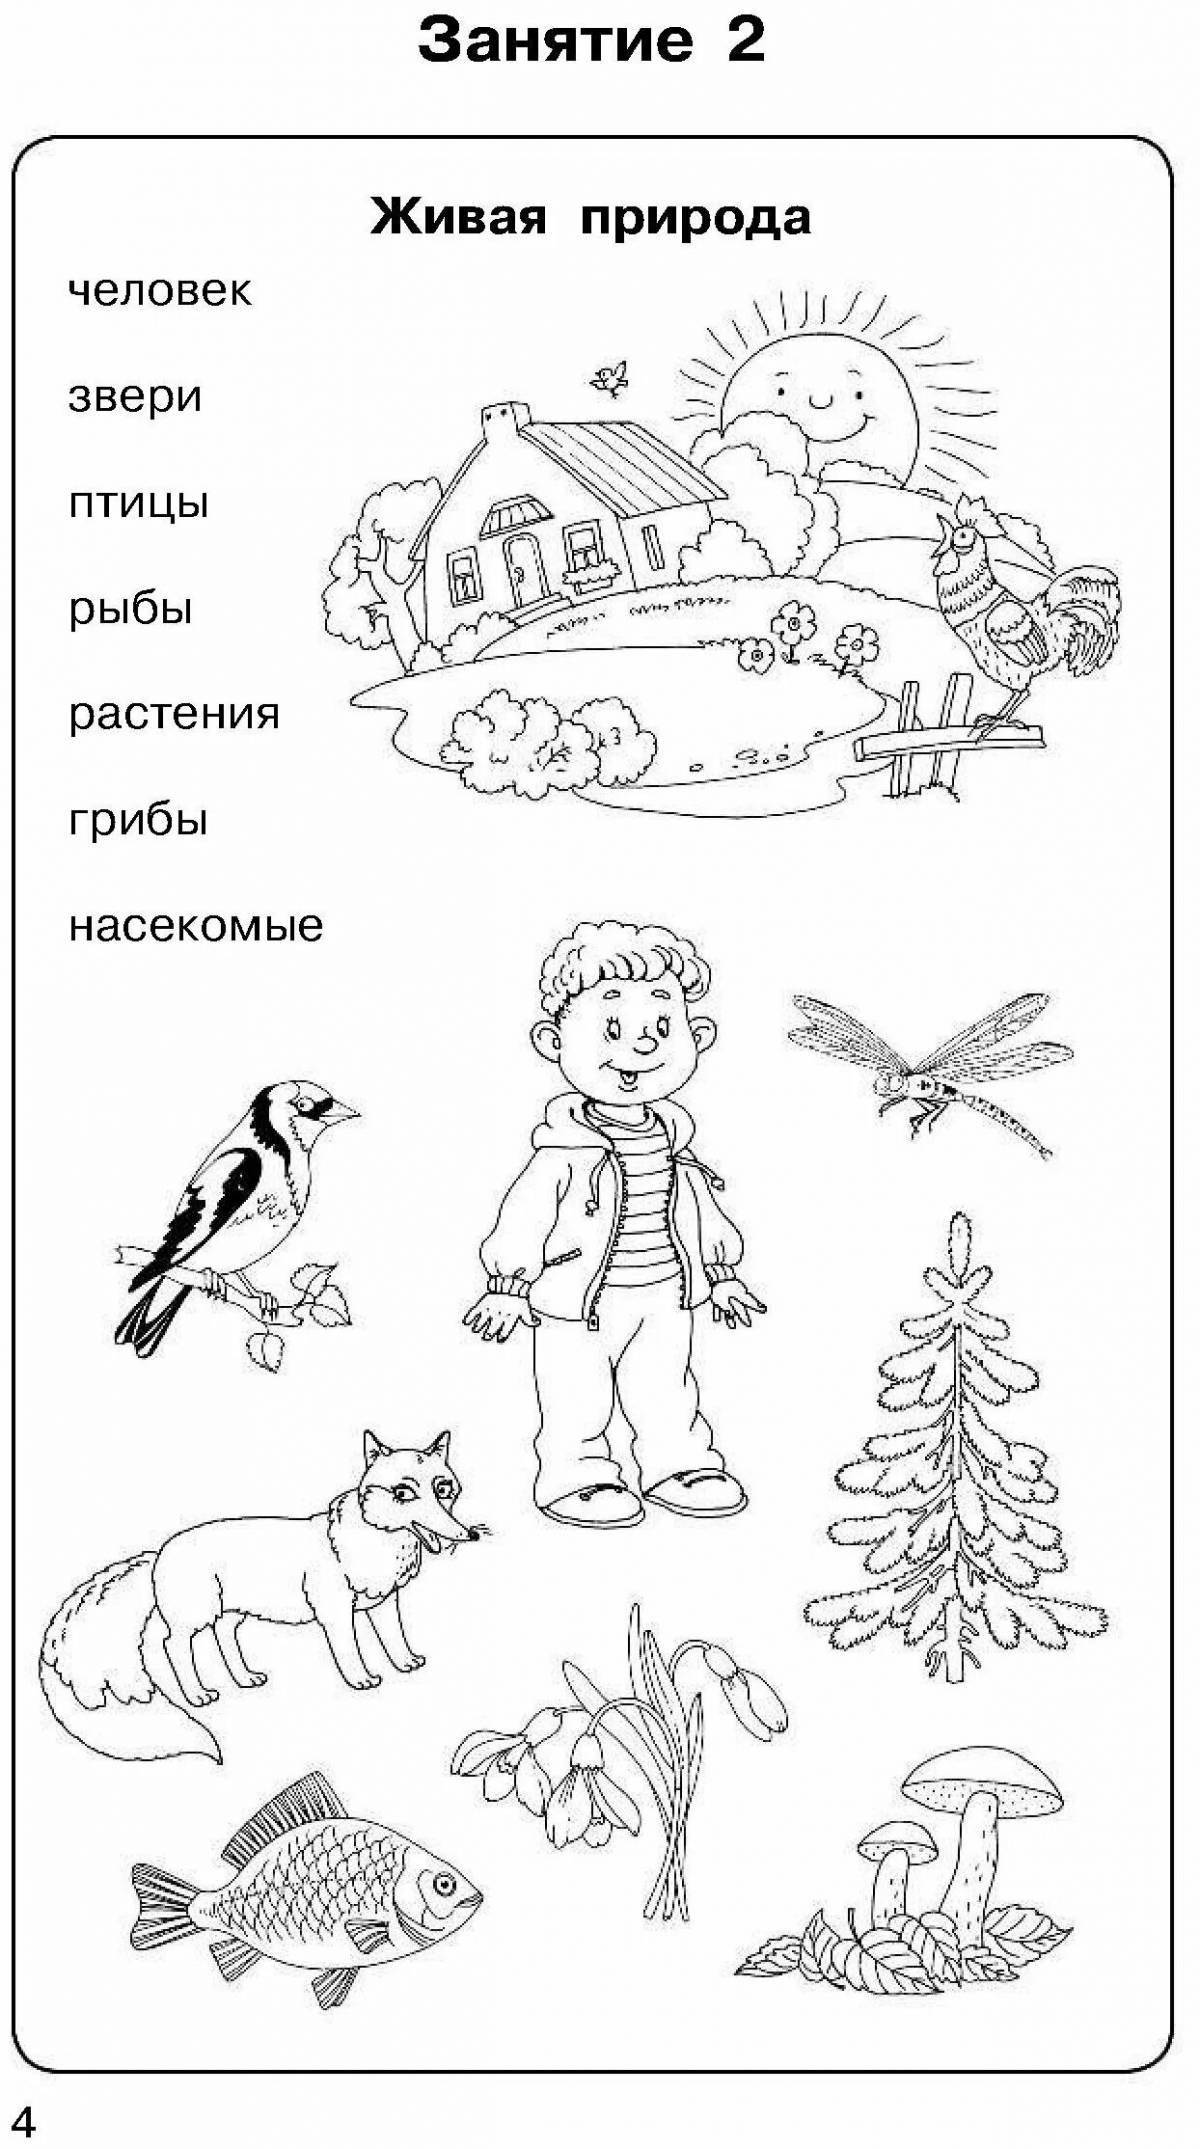 Effective coloring of inanimate nature for children